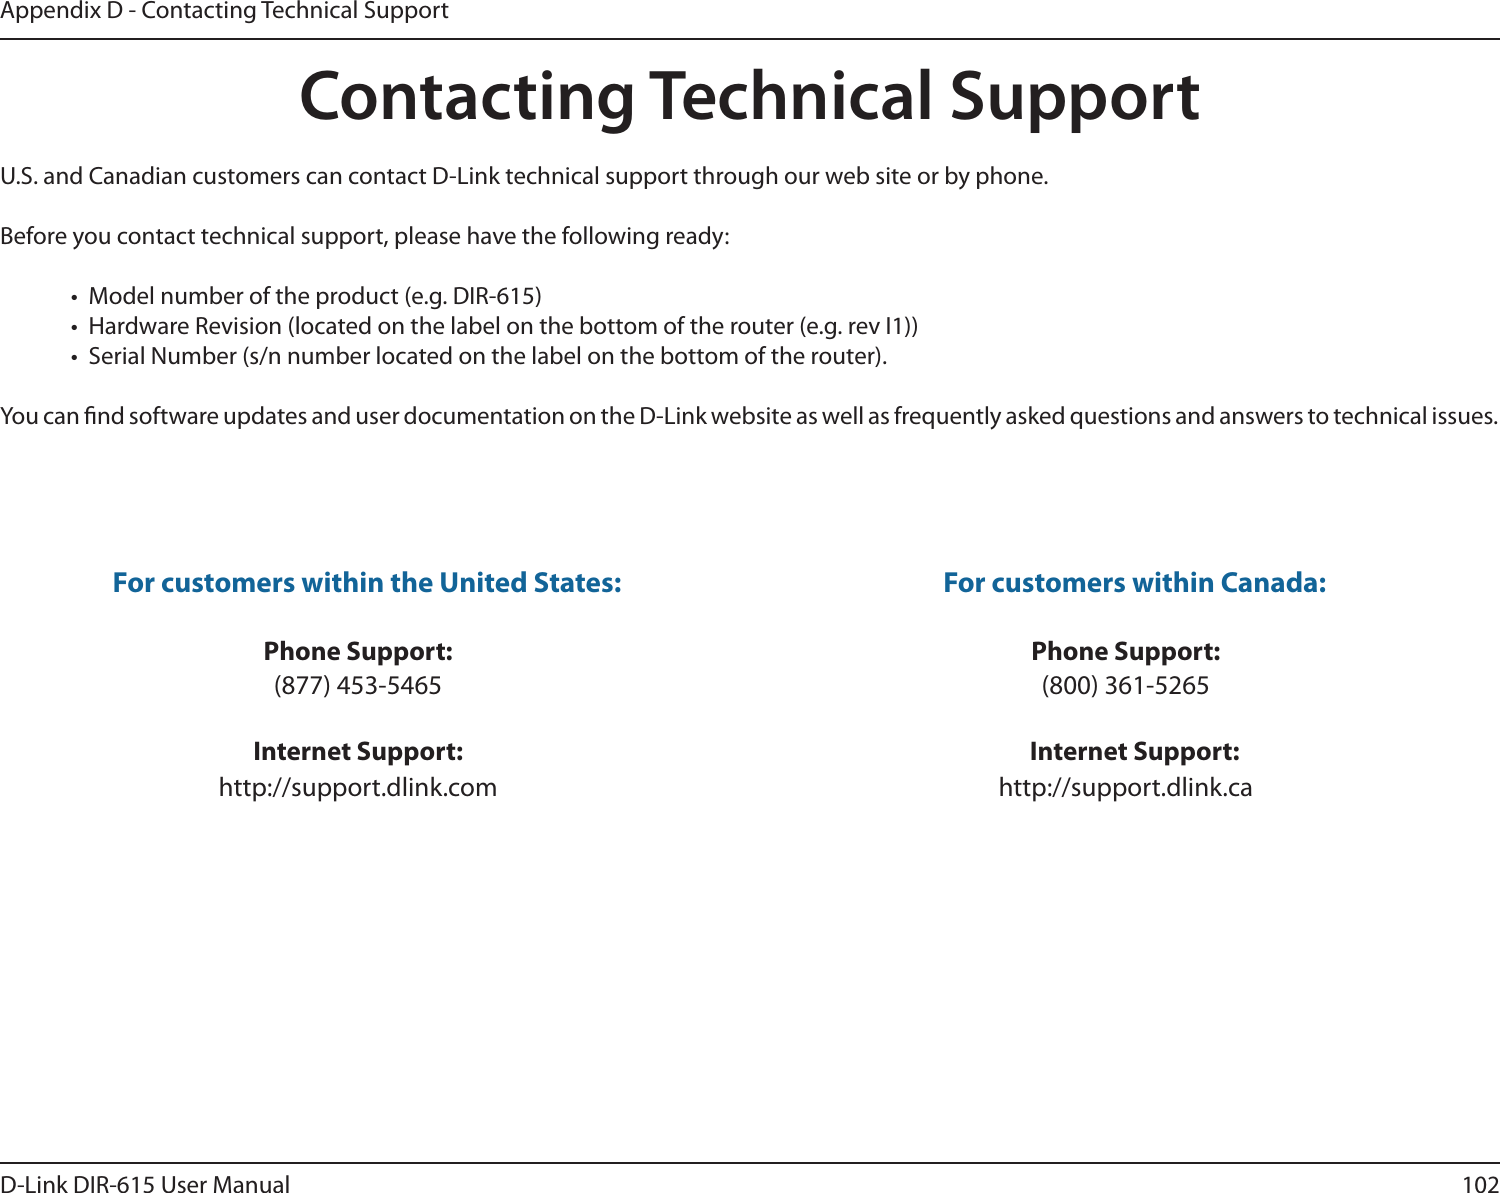 102D-Link DIR-615 User ManualAppendix D - Contacting Technical SupportContacting Technical SupportU.S. and Canadian customers can contact D-Link technical support through our web site or by phone.Before you contact technical support, please have the following ready:•  Model number of the product (e.g. DIR-615)•  Hardware Revision (located on the label on the bottom of the router (e.g. rev I1))•  Serial Number (s/n number located on the label on the bottom of the router). You can nd software updates and user documentation on the D-Link website as well as frequently asked questions and answers to technical issues.For customers within the United States: Phone Support:(877) 453-5465Internet Support:http://support.dlink.com For customers within Canada: Phone Support:(800) 361-5265 Internet Support:http://support.dlink.ca